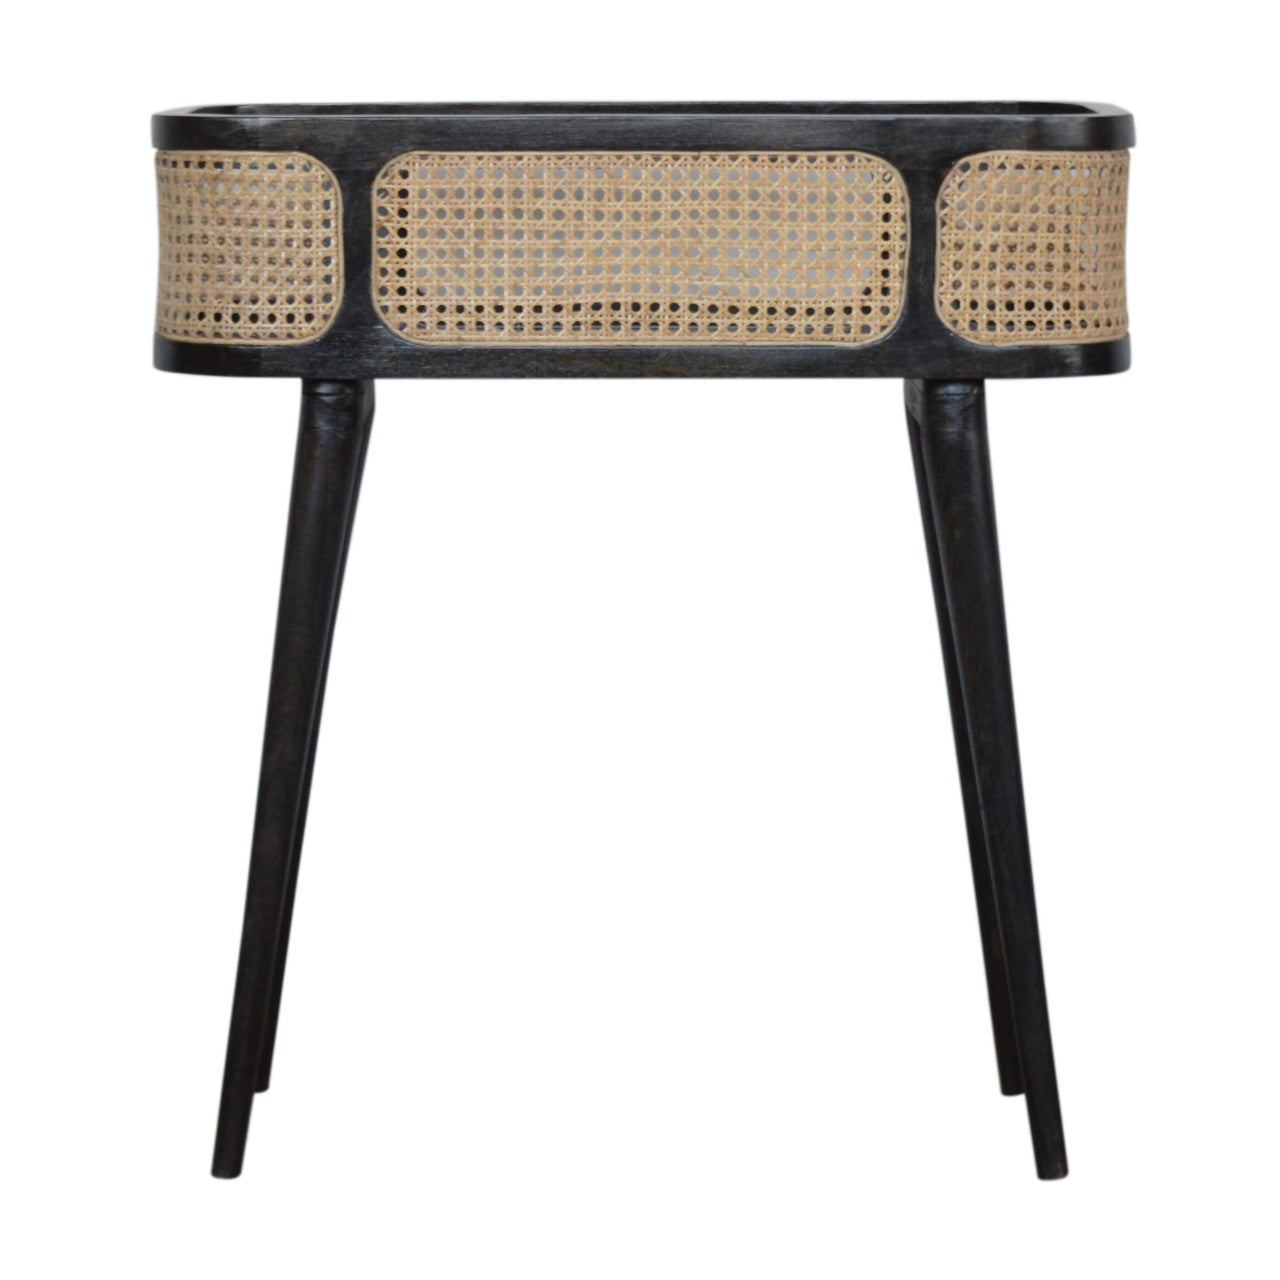 View Larissa Carbon Black Tray Table information